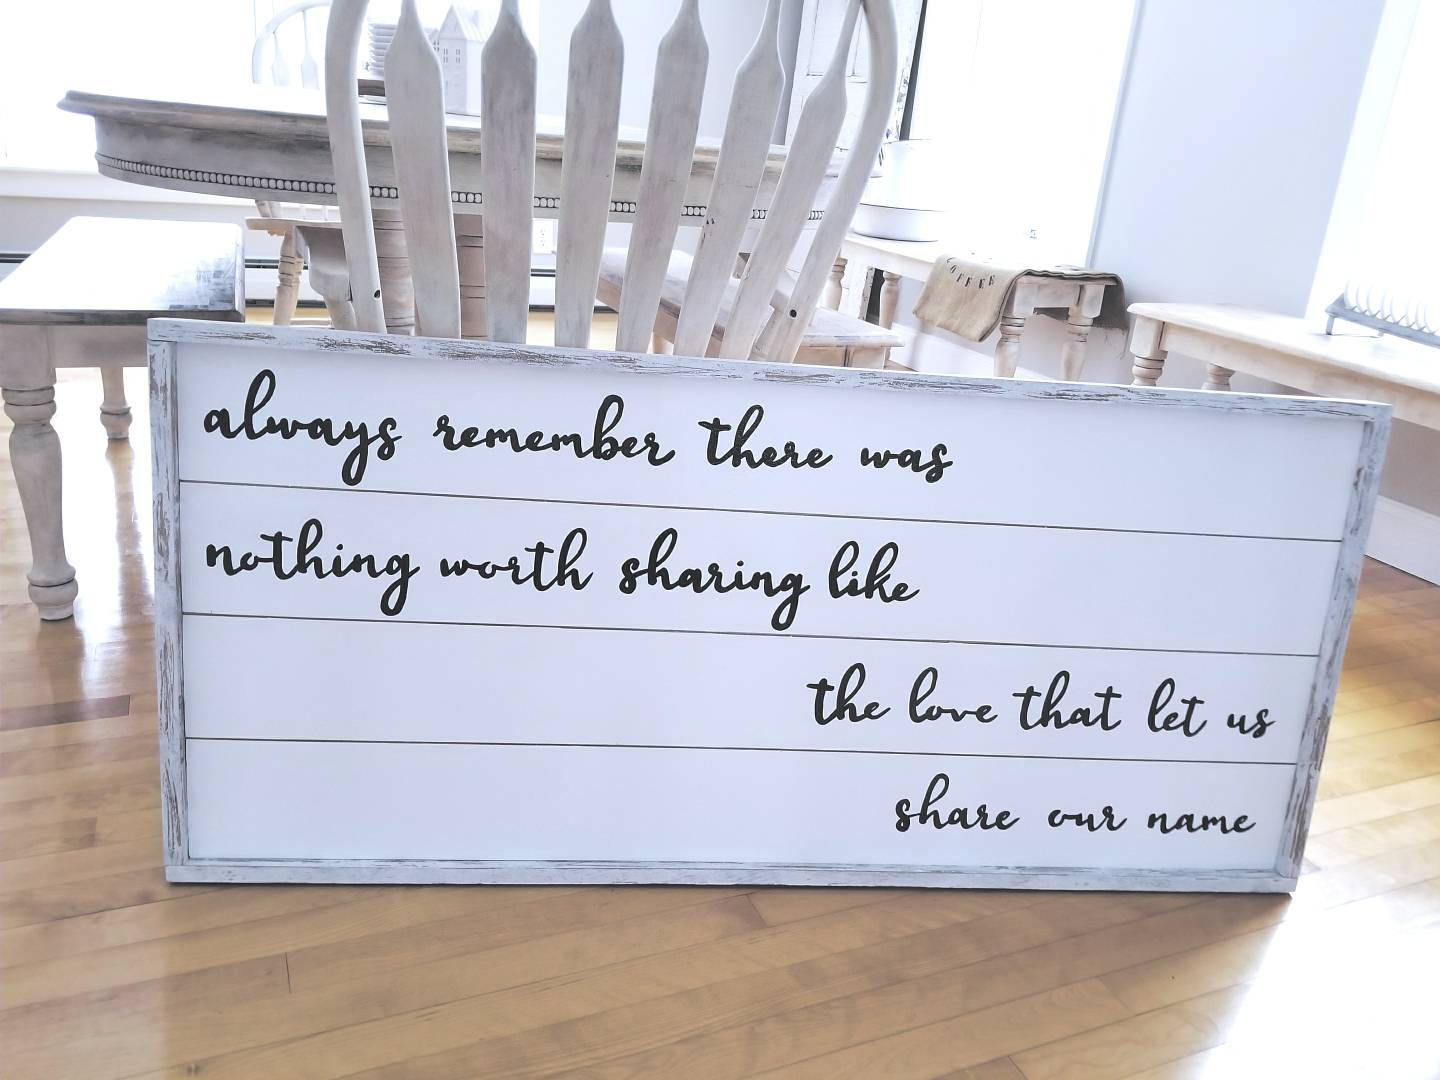 Custome handmade sign always remember there is nothing worth sharing Reclaimed wood Wedding home and decor song lyrics